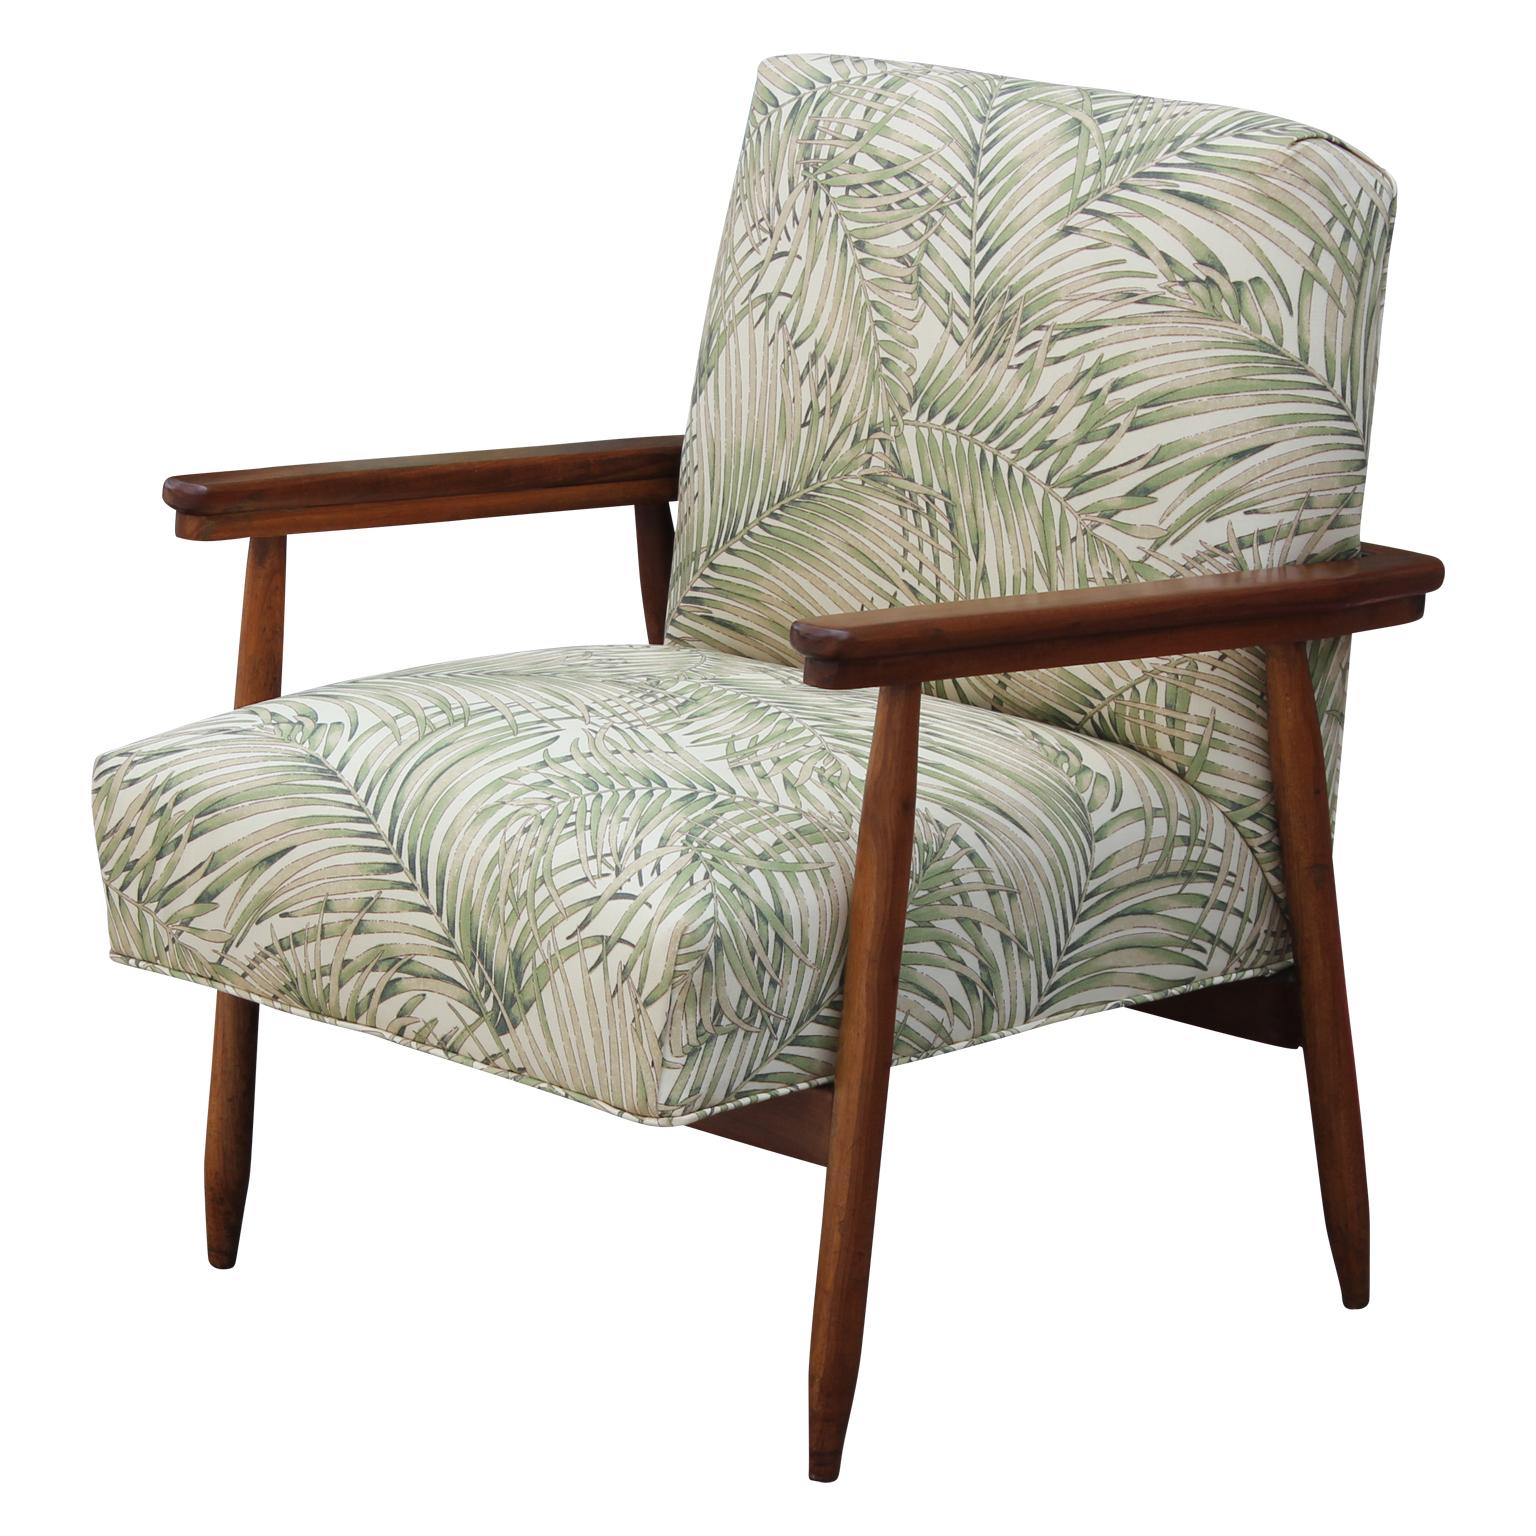 Pair of Modern Italian Danish Style Palm Leaf Patterned Lounge Chairs 1